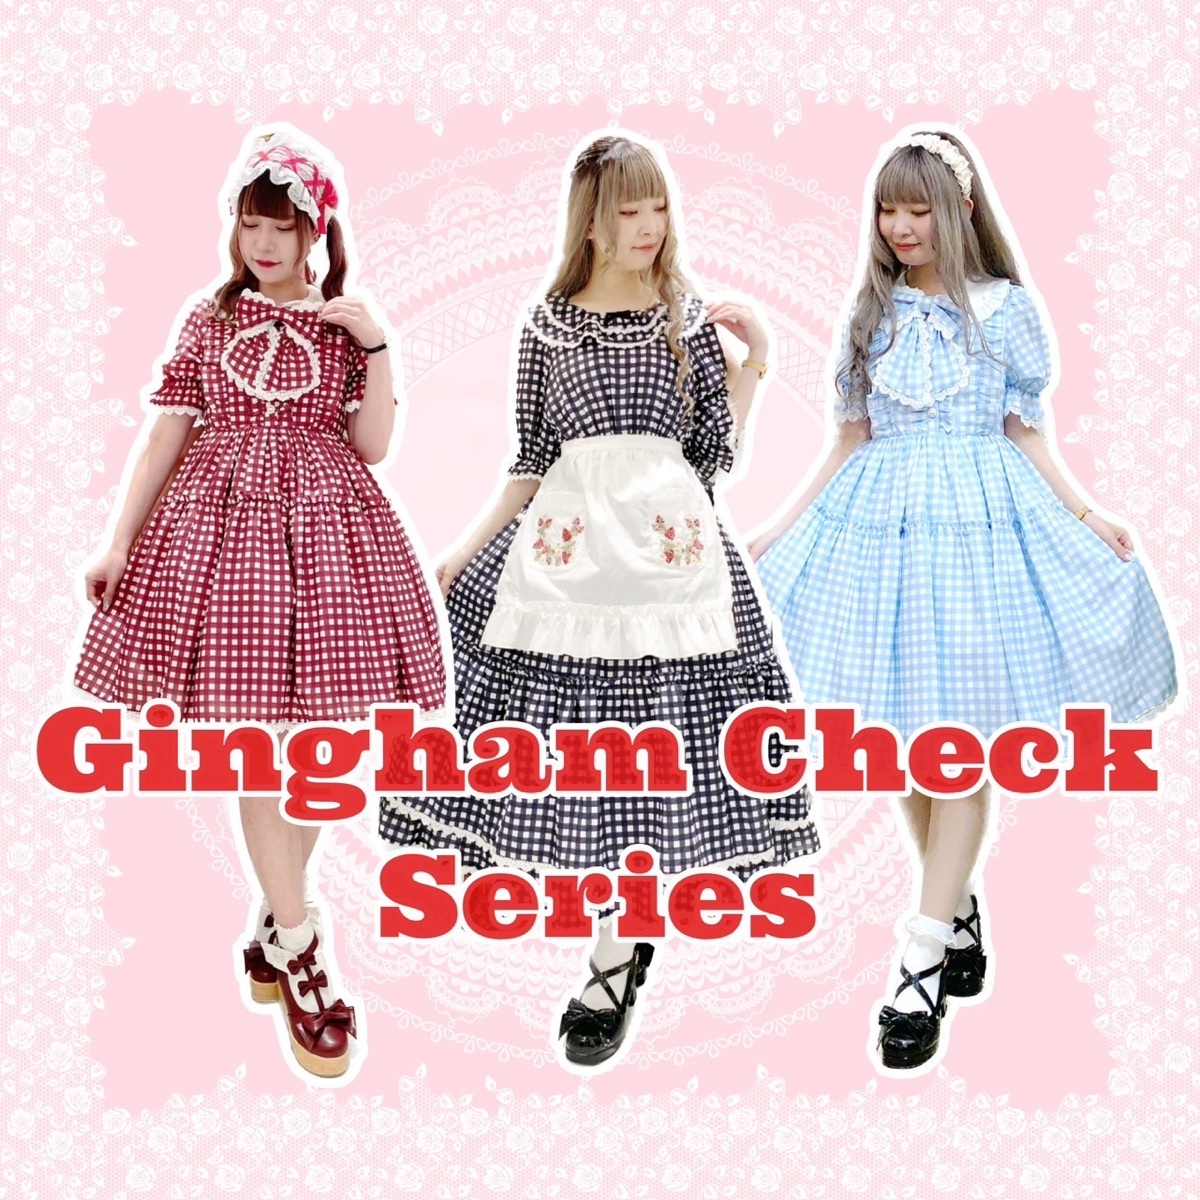 Gingham Check series